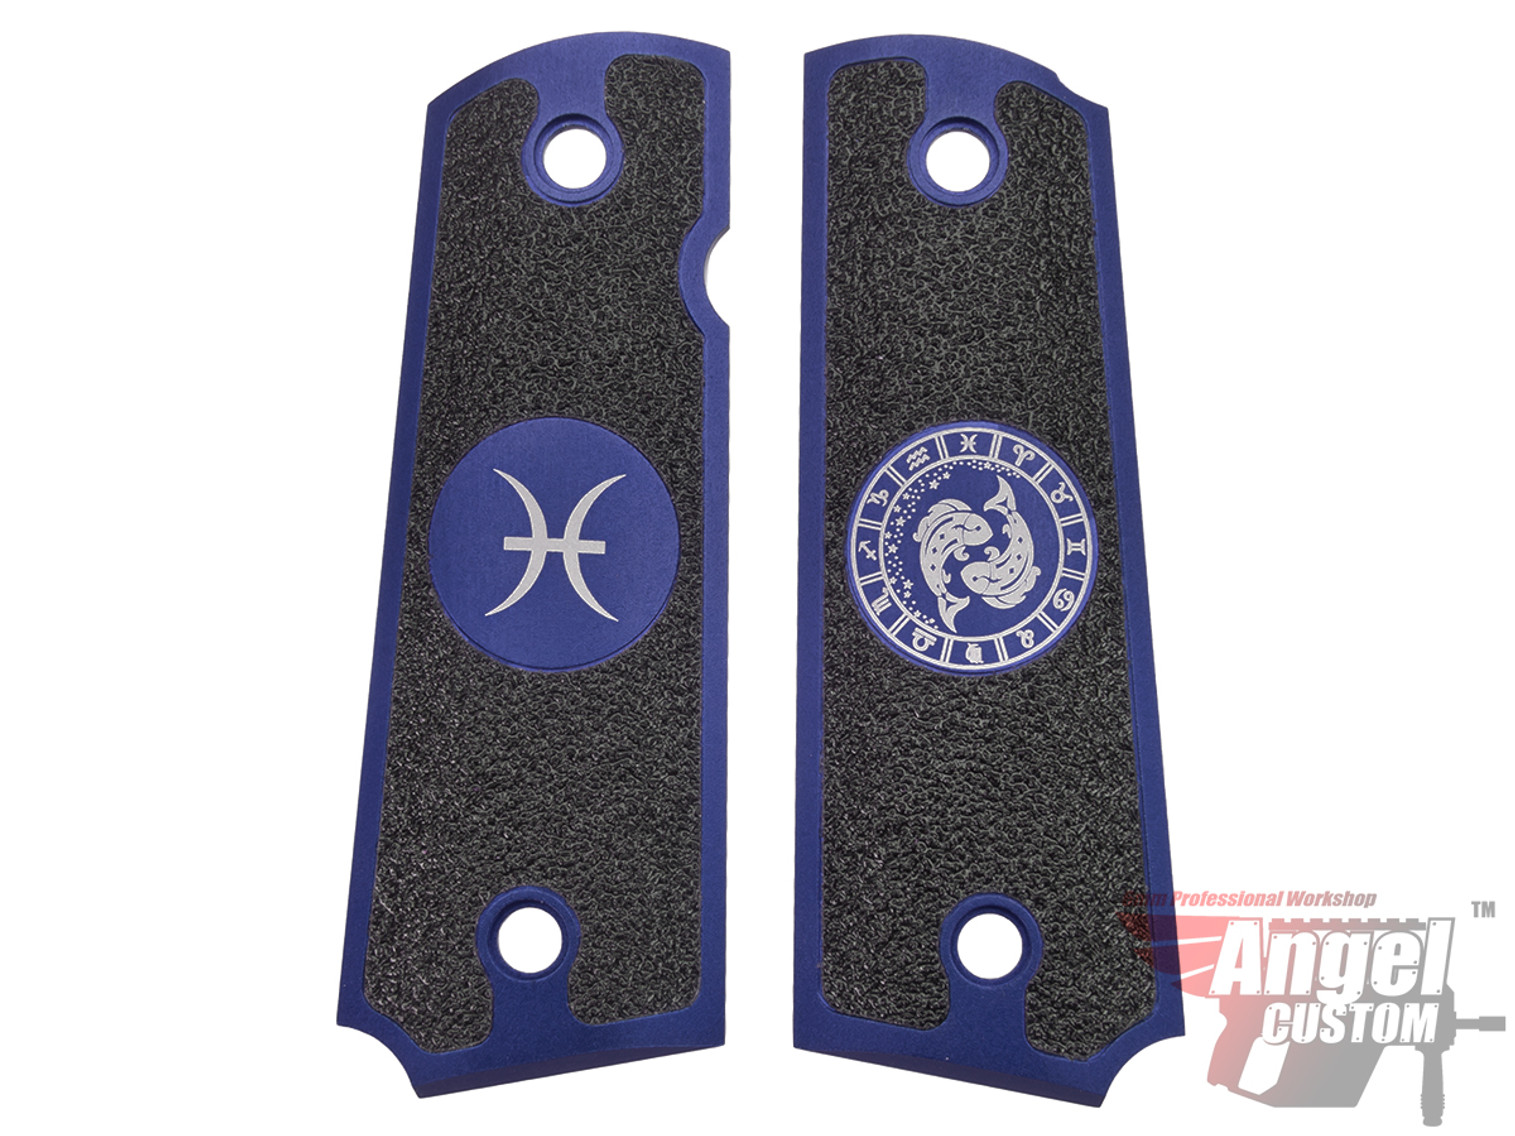 Angel Custom CNC Machined Tac-Glove "Zodiac" Grips for WE-Tech 1911 Series Airsoft Pistols - Navy Blue (Sign: Pisces)